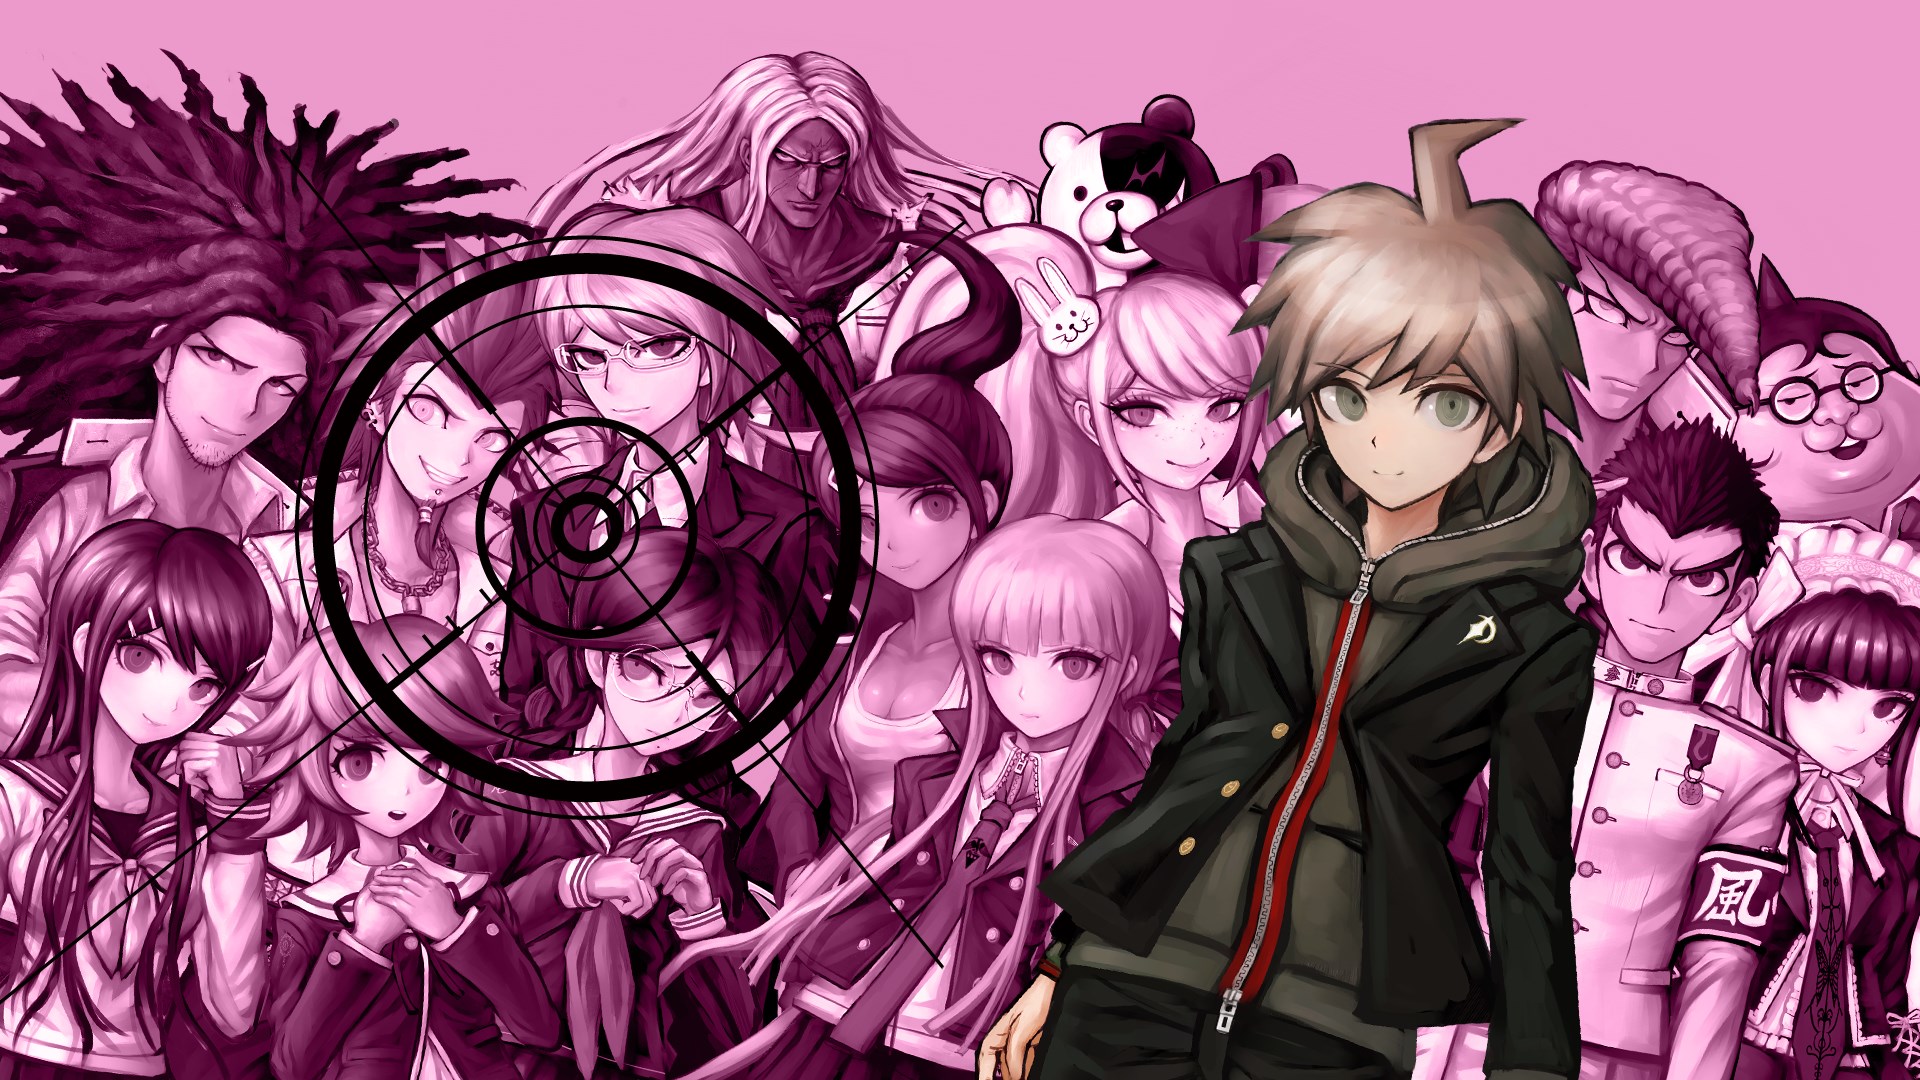 danganronpa-anniversary-edition-just-got-a-surprise-release-on-xbox-and-pc-game-pass-vgc